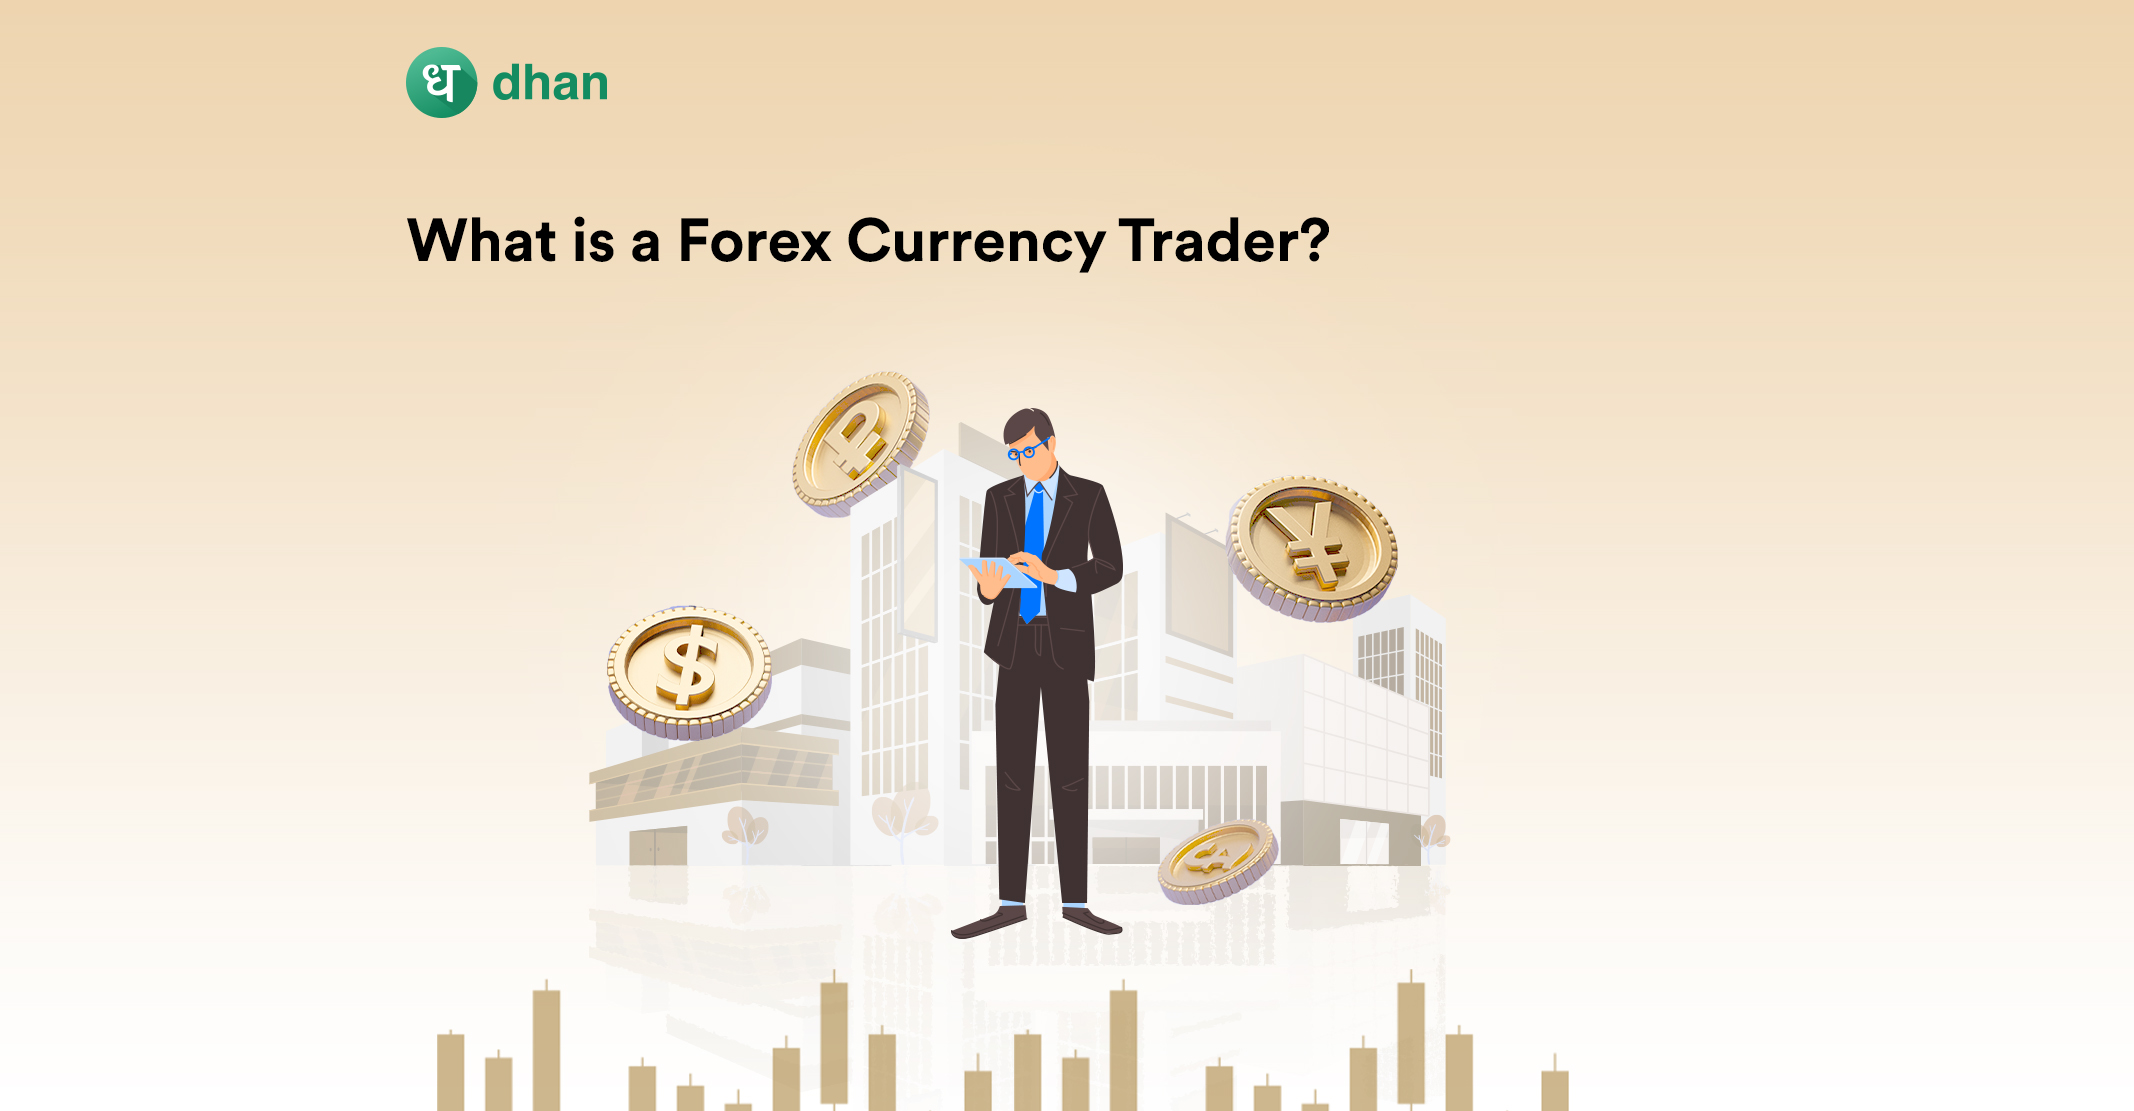 What is a forex currency trader